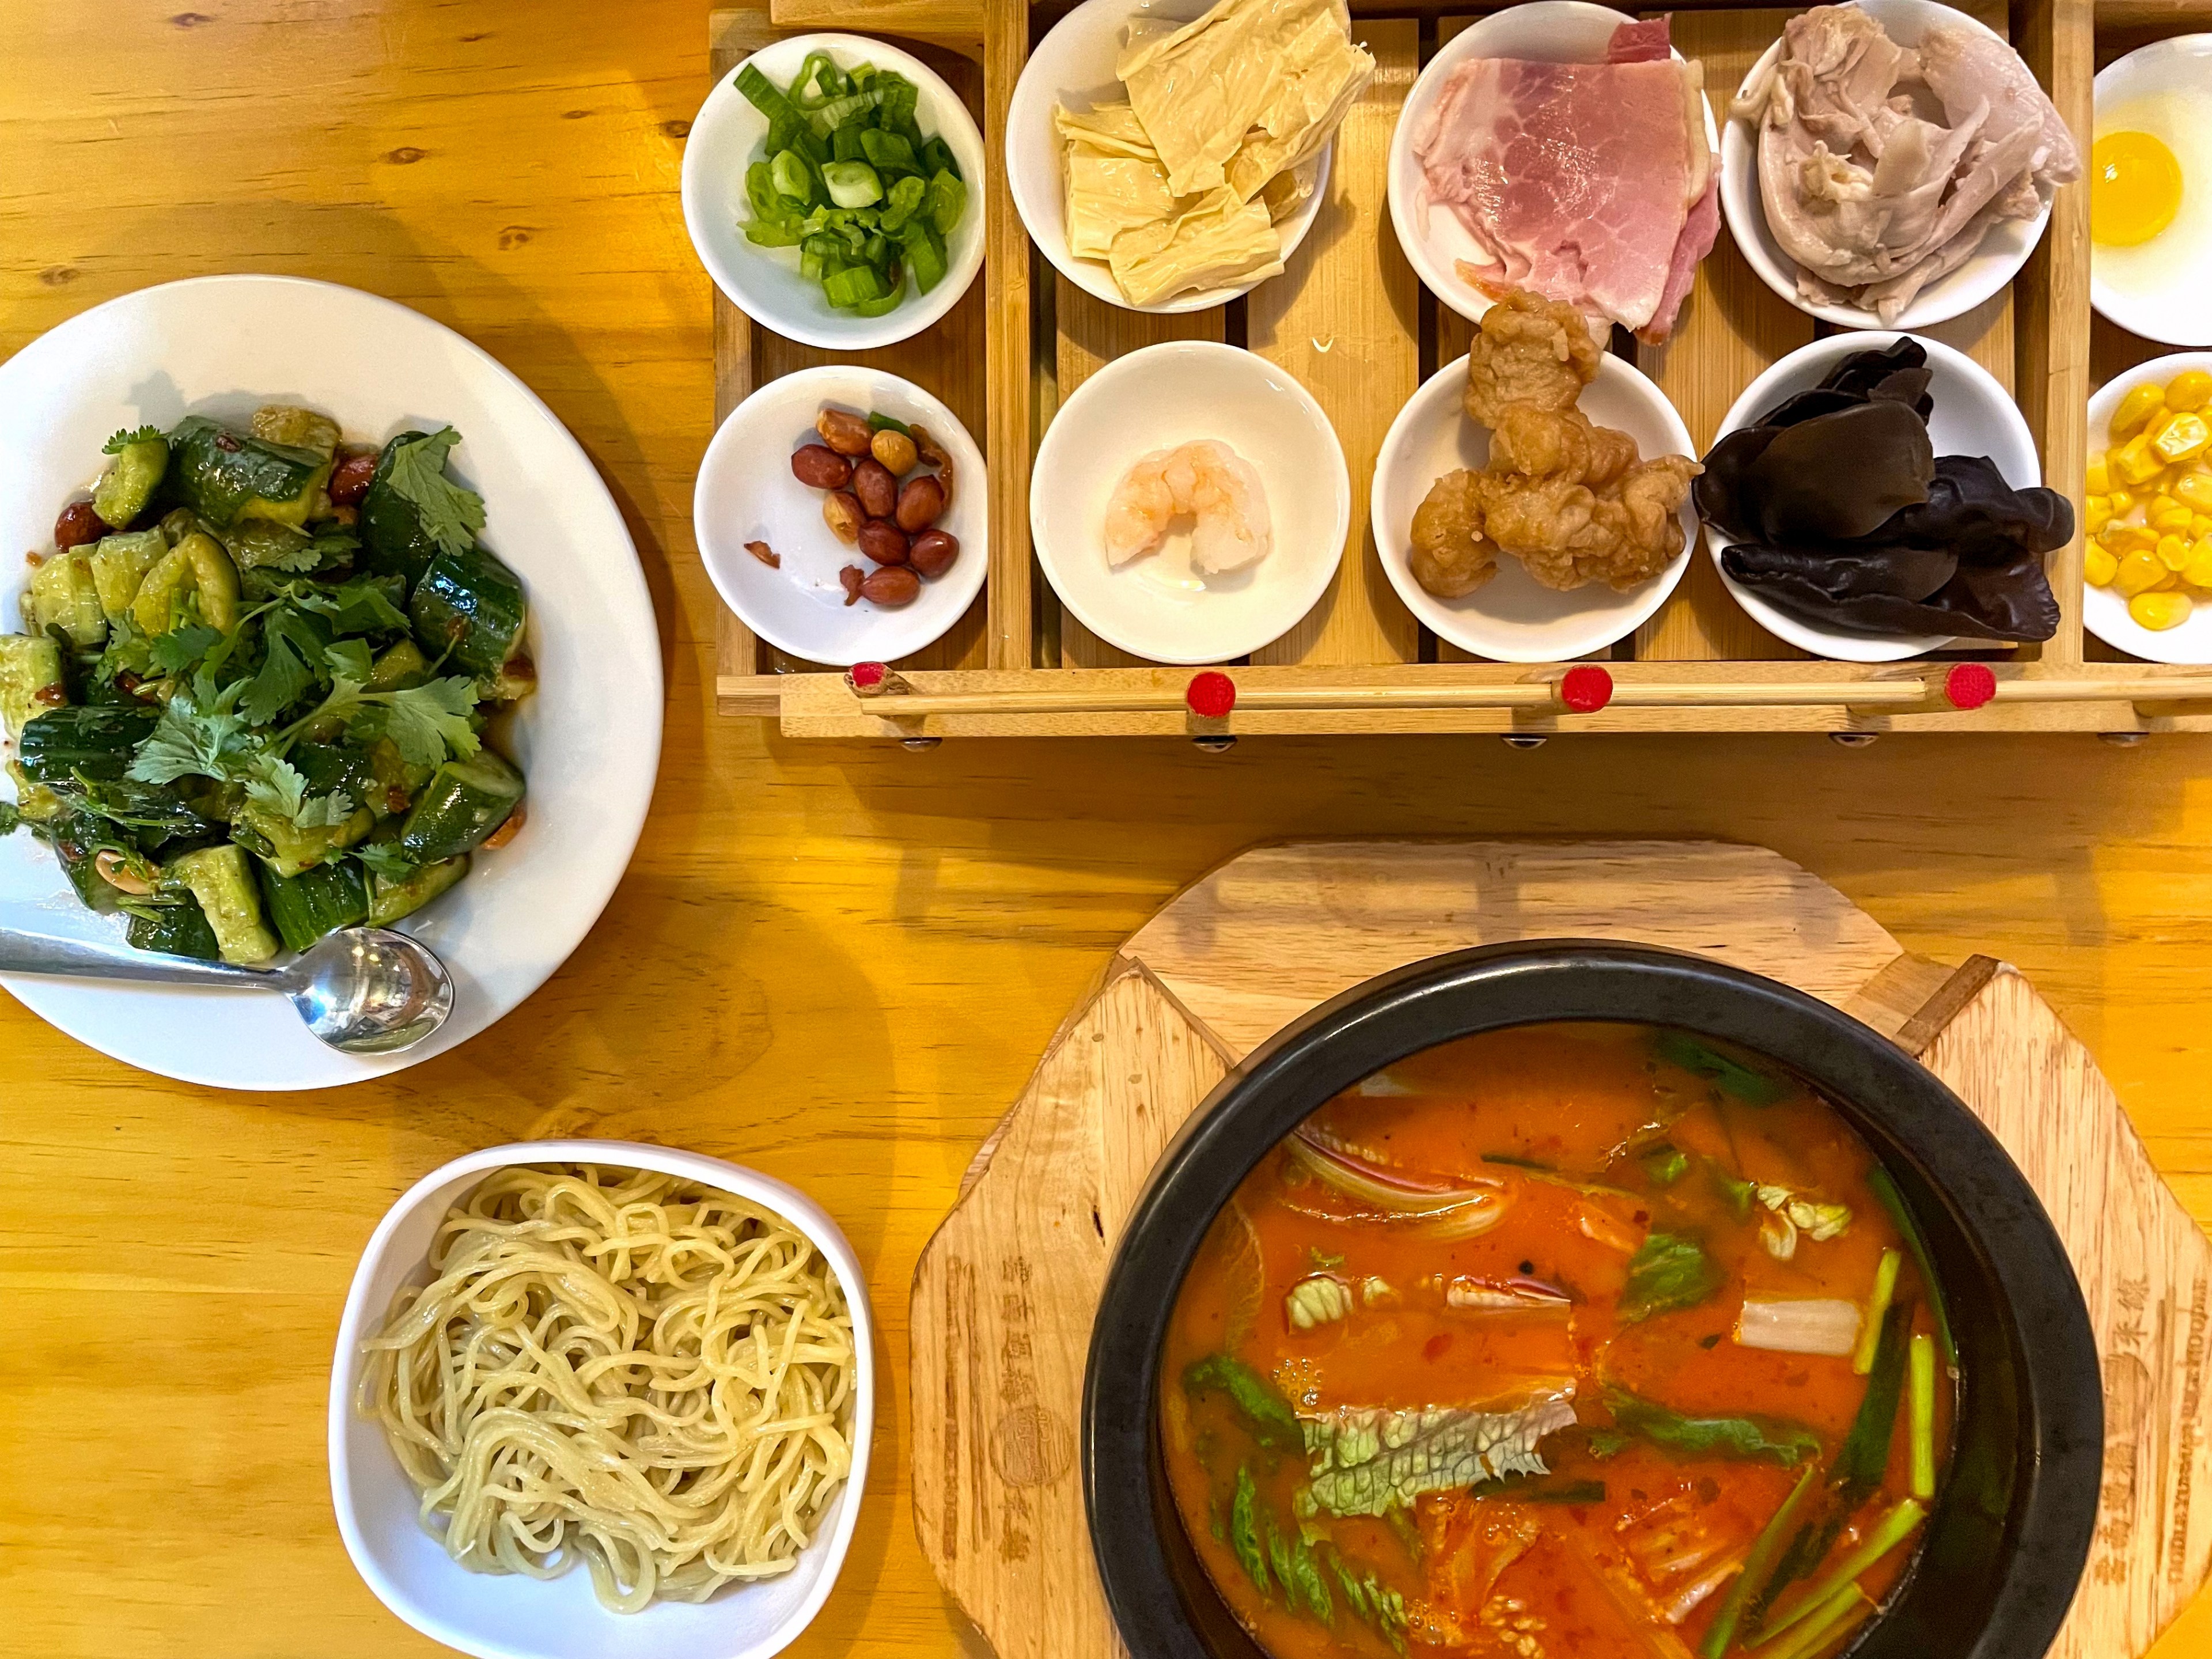 Oodle introduces Yunaan bridge noodles to the Outer Richmond. Little Pot Rice Noodles has a mildly spicy, chili oil-slicked broth and a bridge of ingredients to cook up.